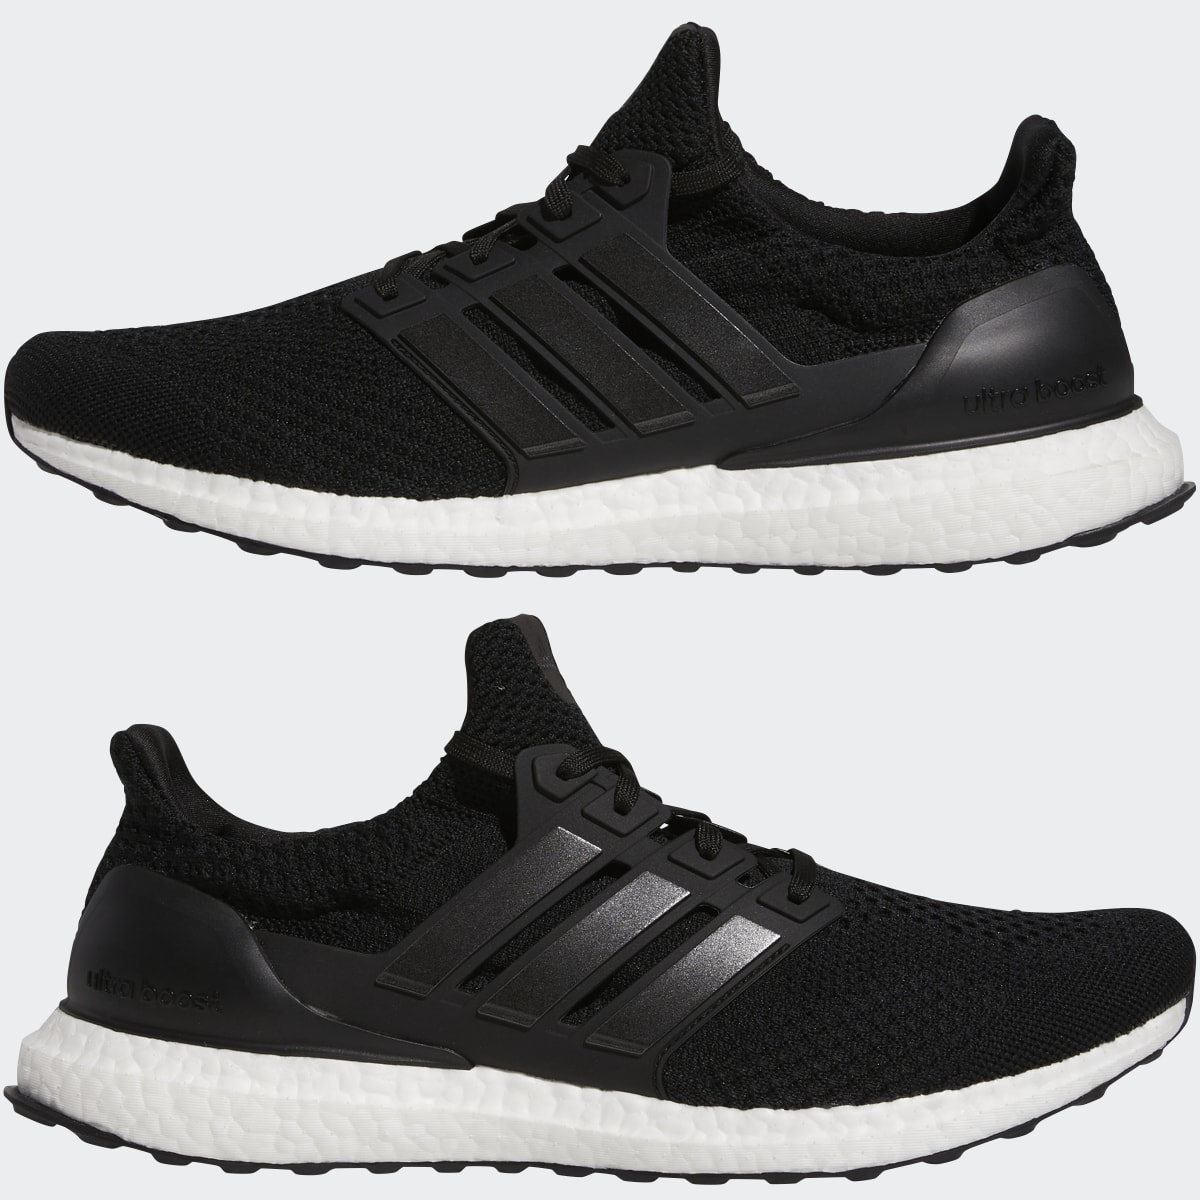 Adidas Ultraboost 5 DNA Running Lifestyle Shoes. 11